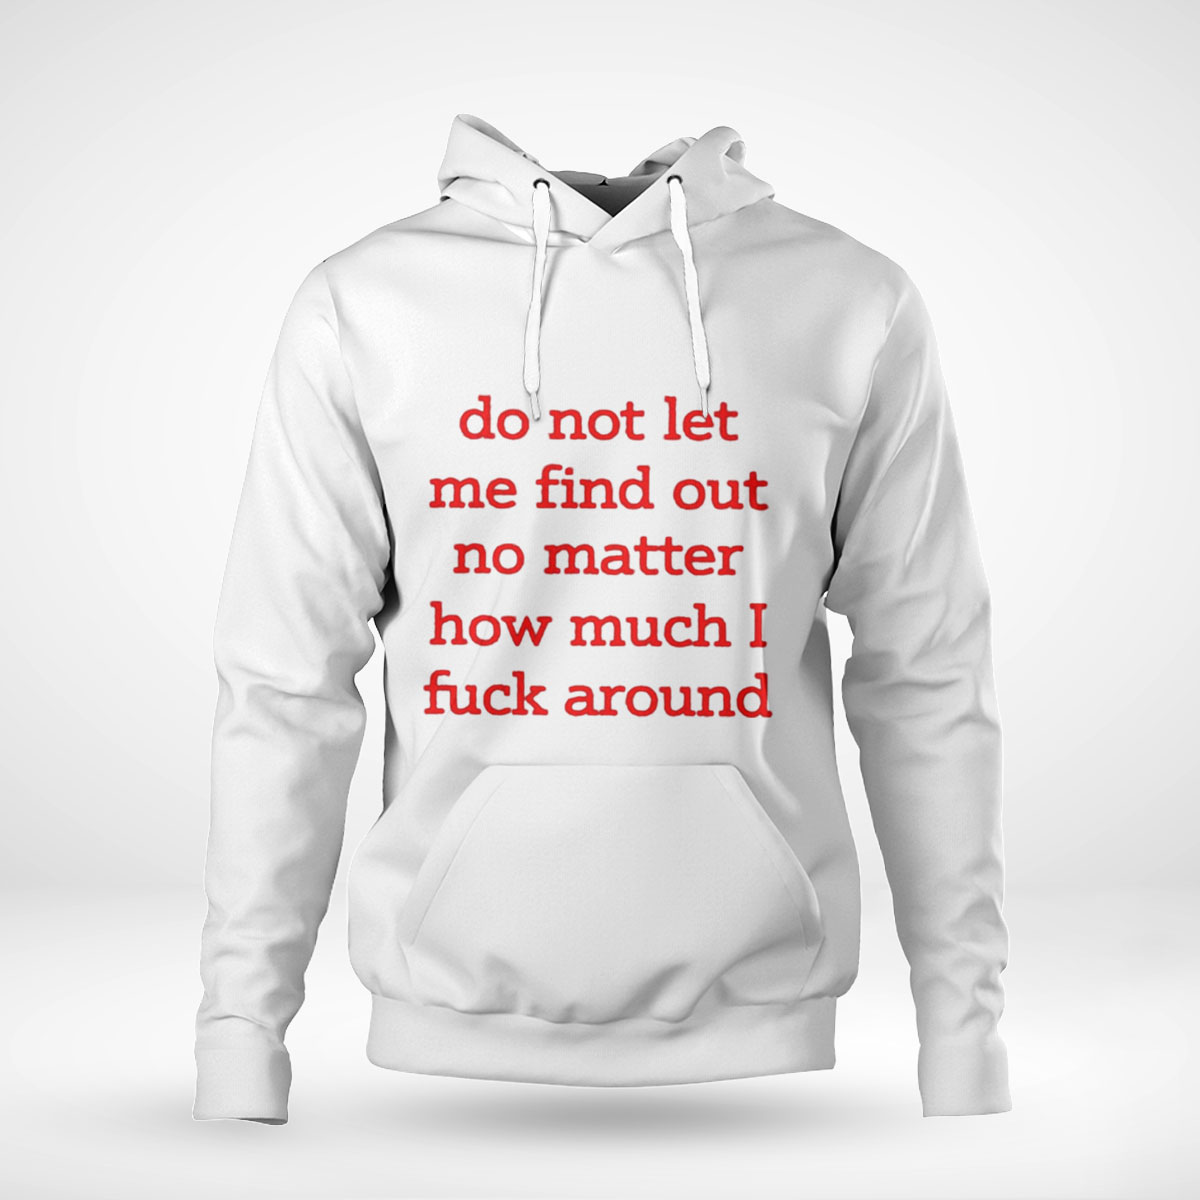 Do Not Let Me Find Out No Matter How Much I Fuck Around Hoodie T-shirt Long Sleeve, Ladies Tee